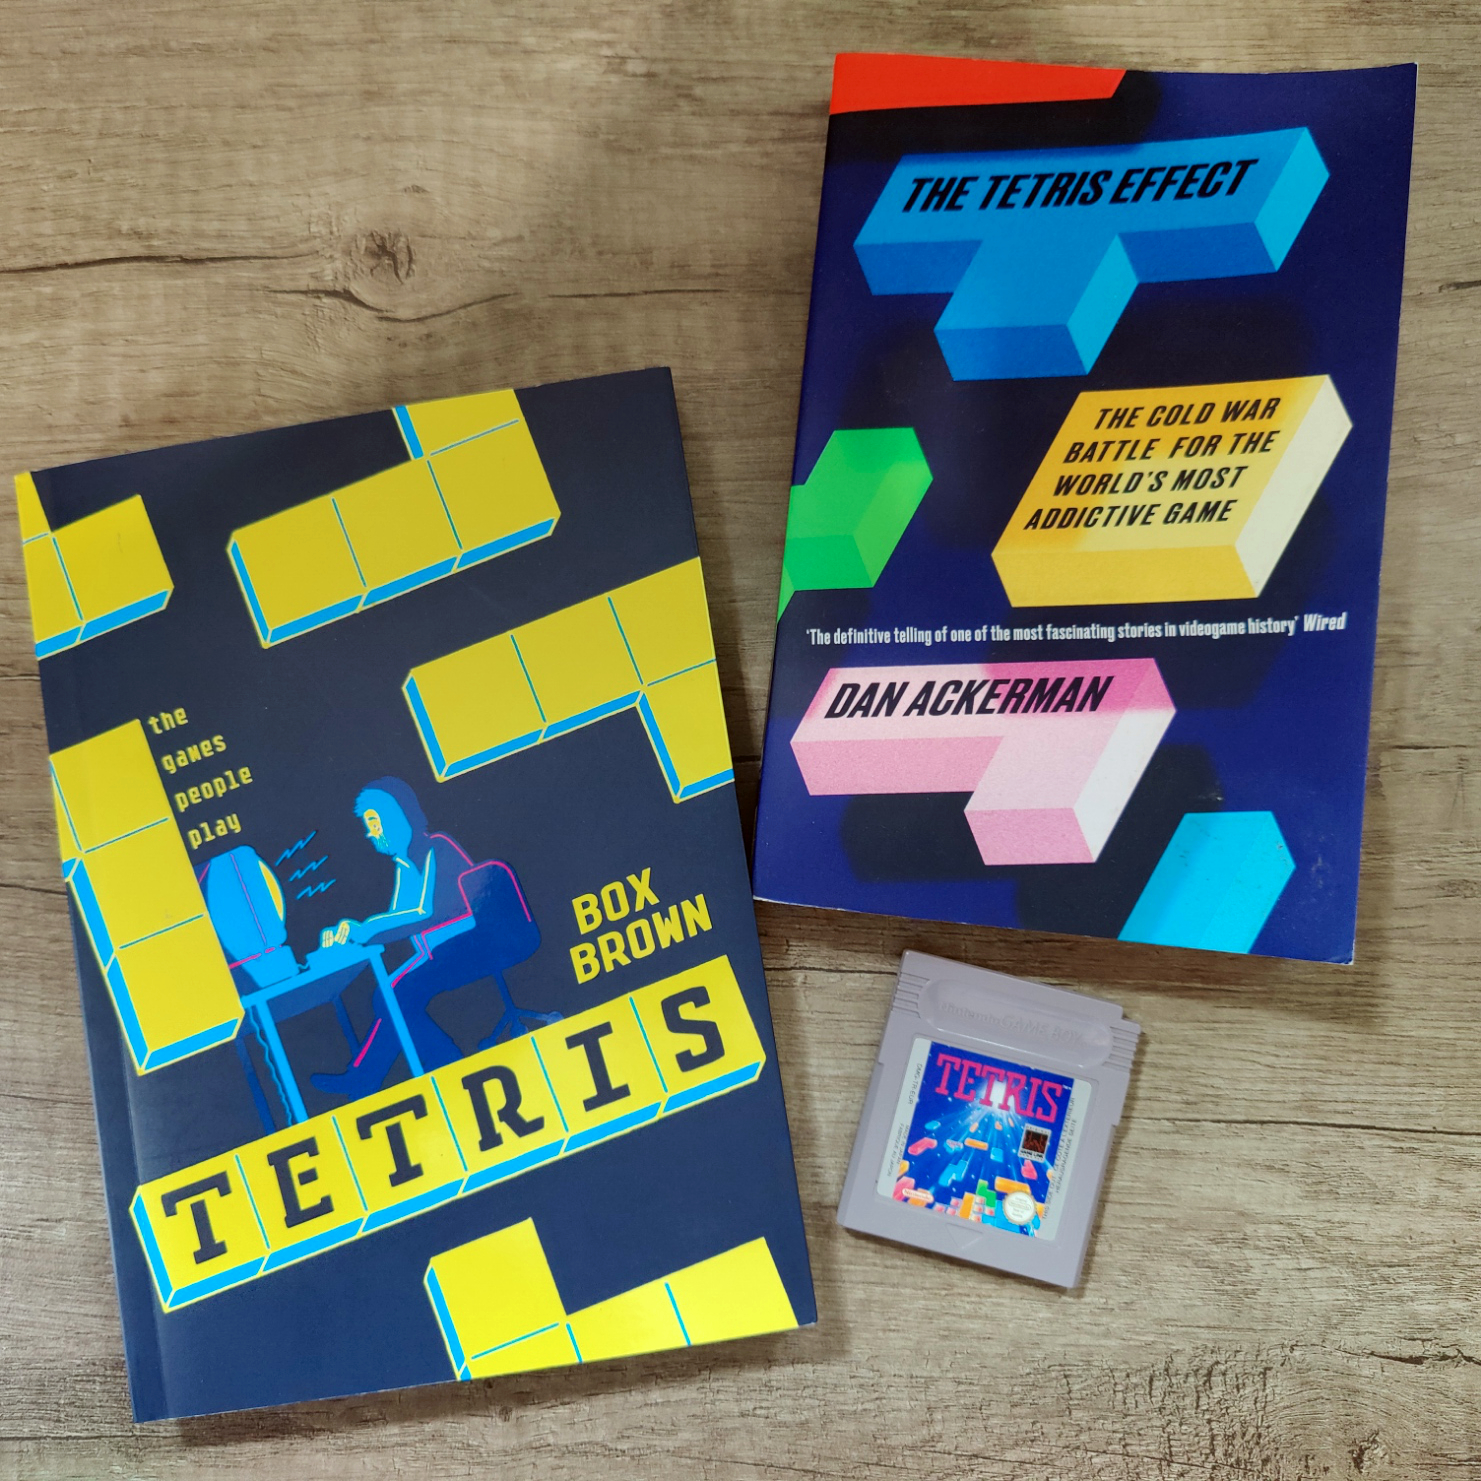 Two Books and a Tetris Gameboy Cartridge on a table - Dan Ackerman's "The Tetris Effect" and Box Brown's "Tetris: The Games People Play"